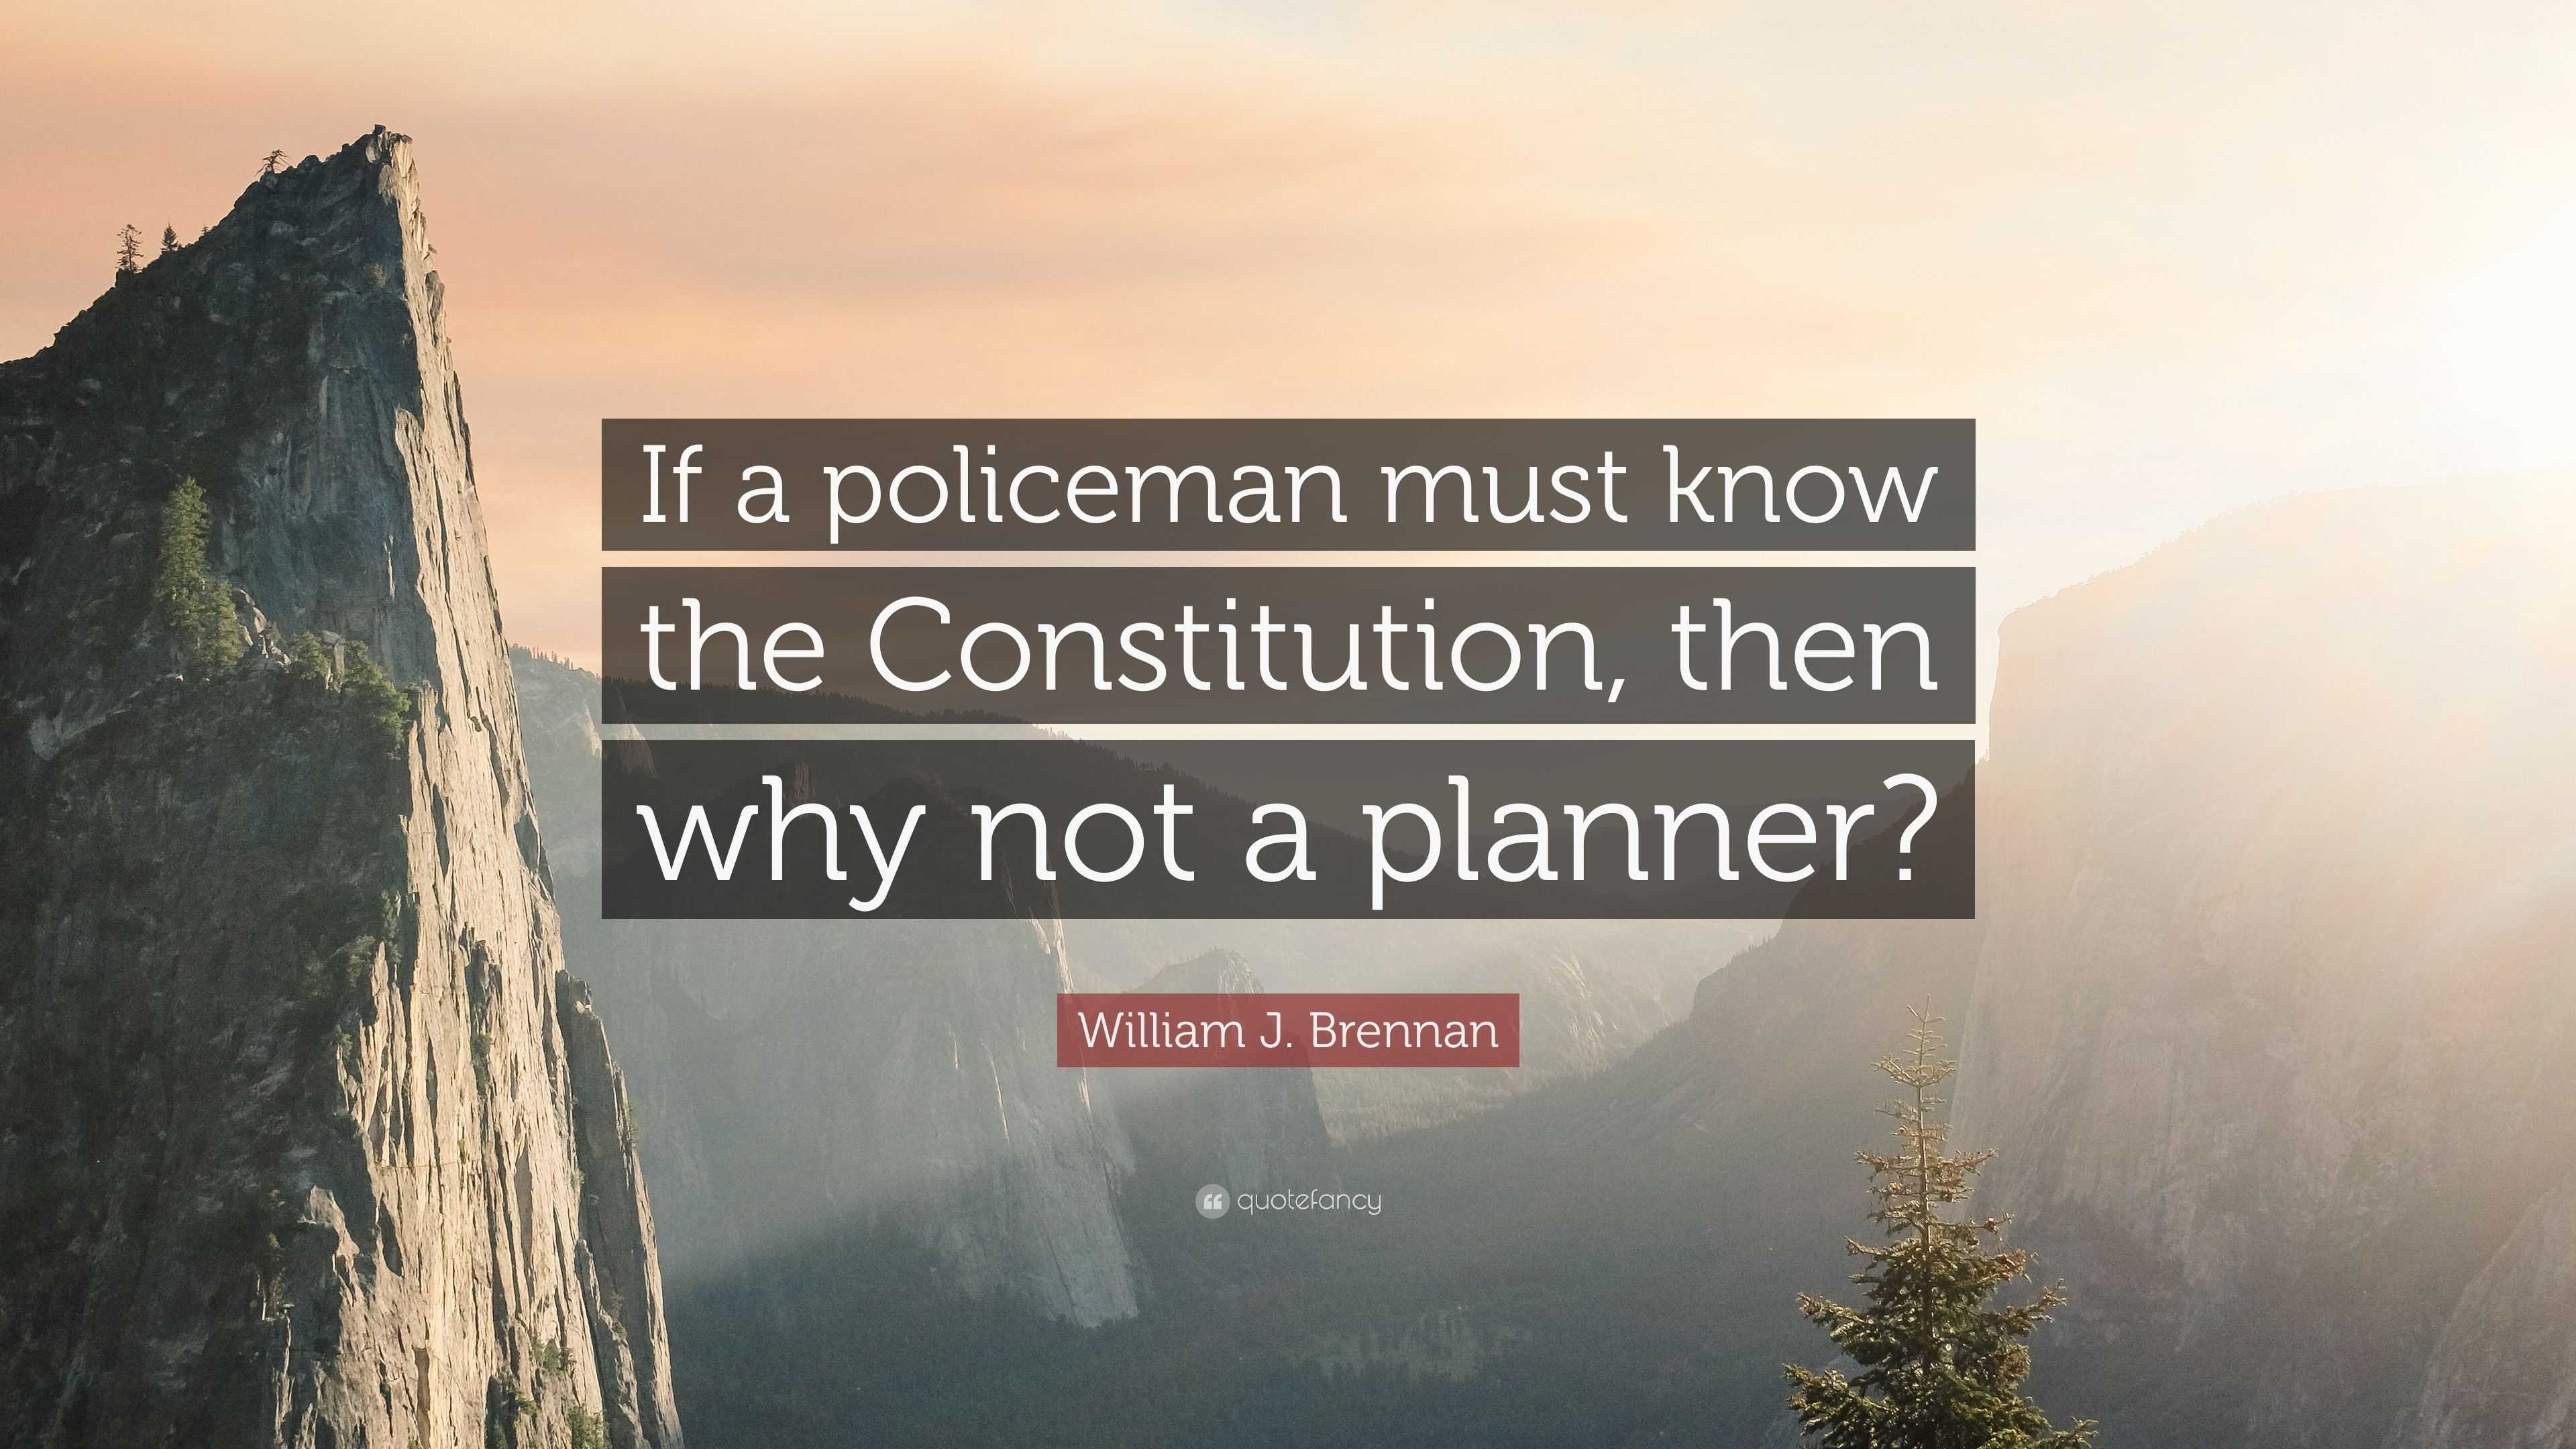 William J Brennan Quote “if A Policeman Must Know The Constitution Then Why Not A Planner” 1739